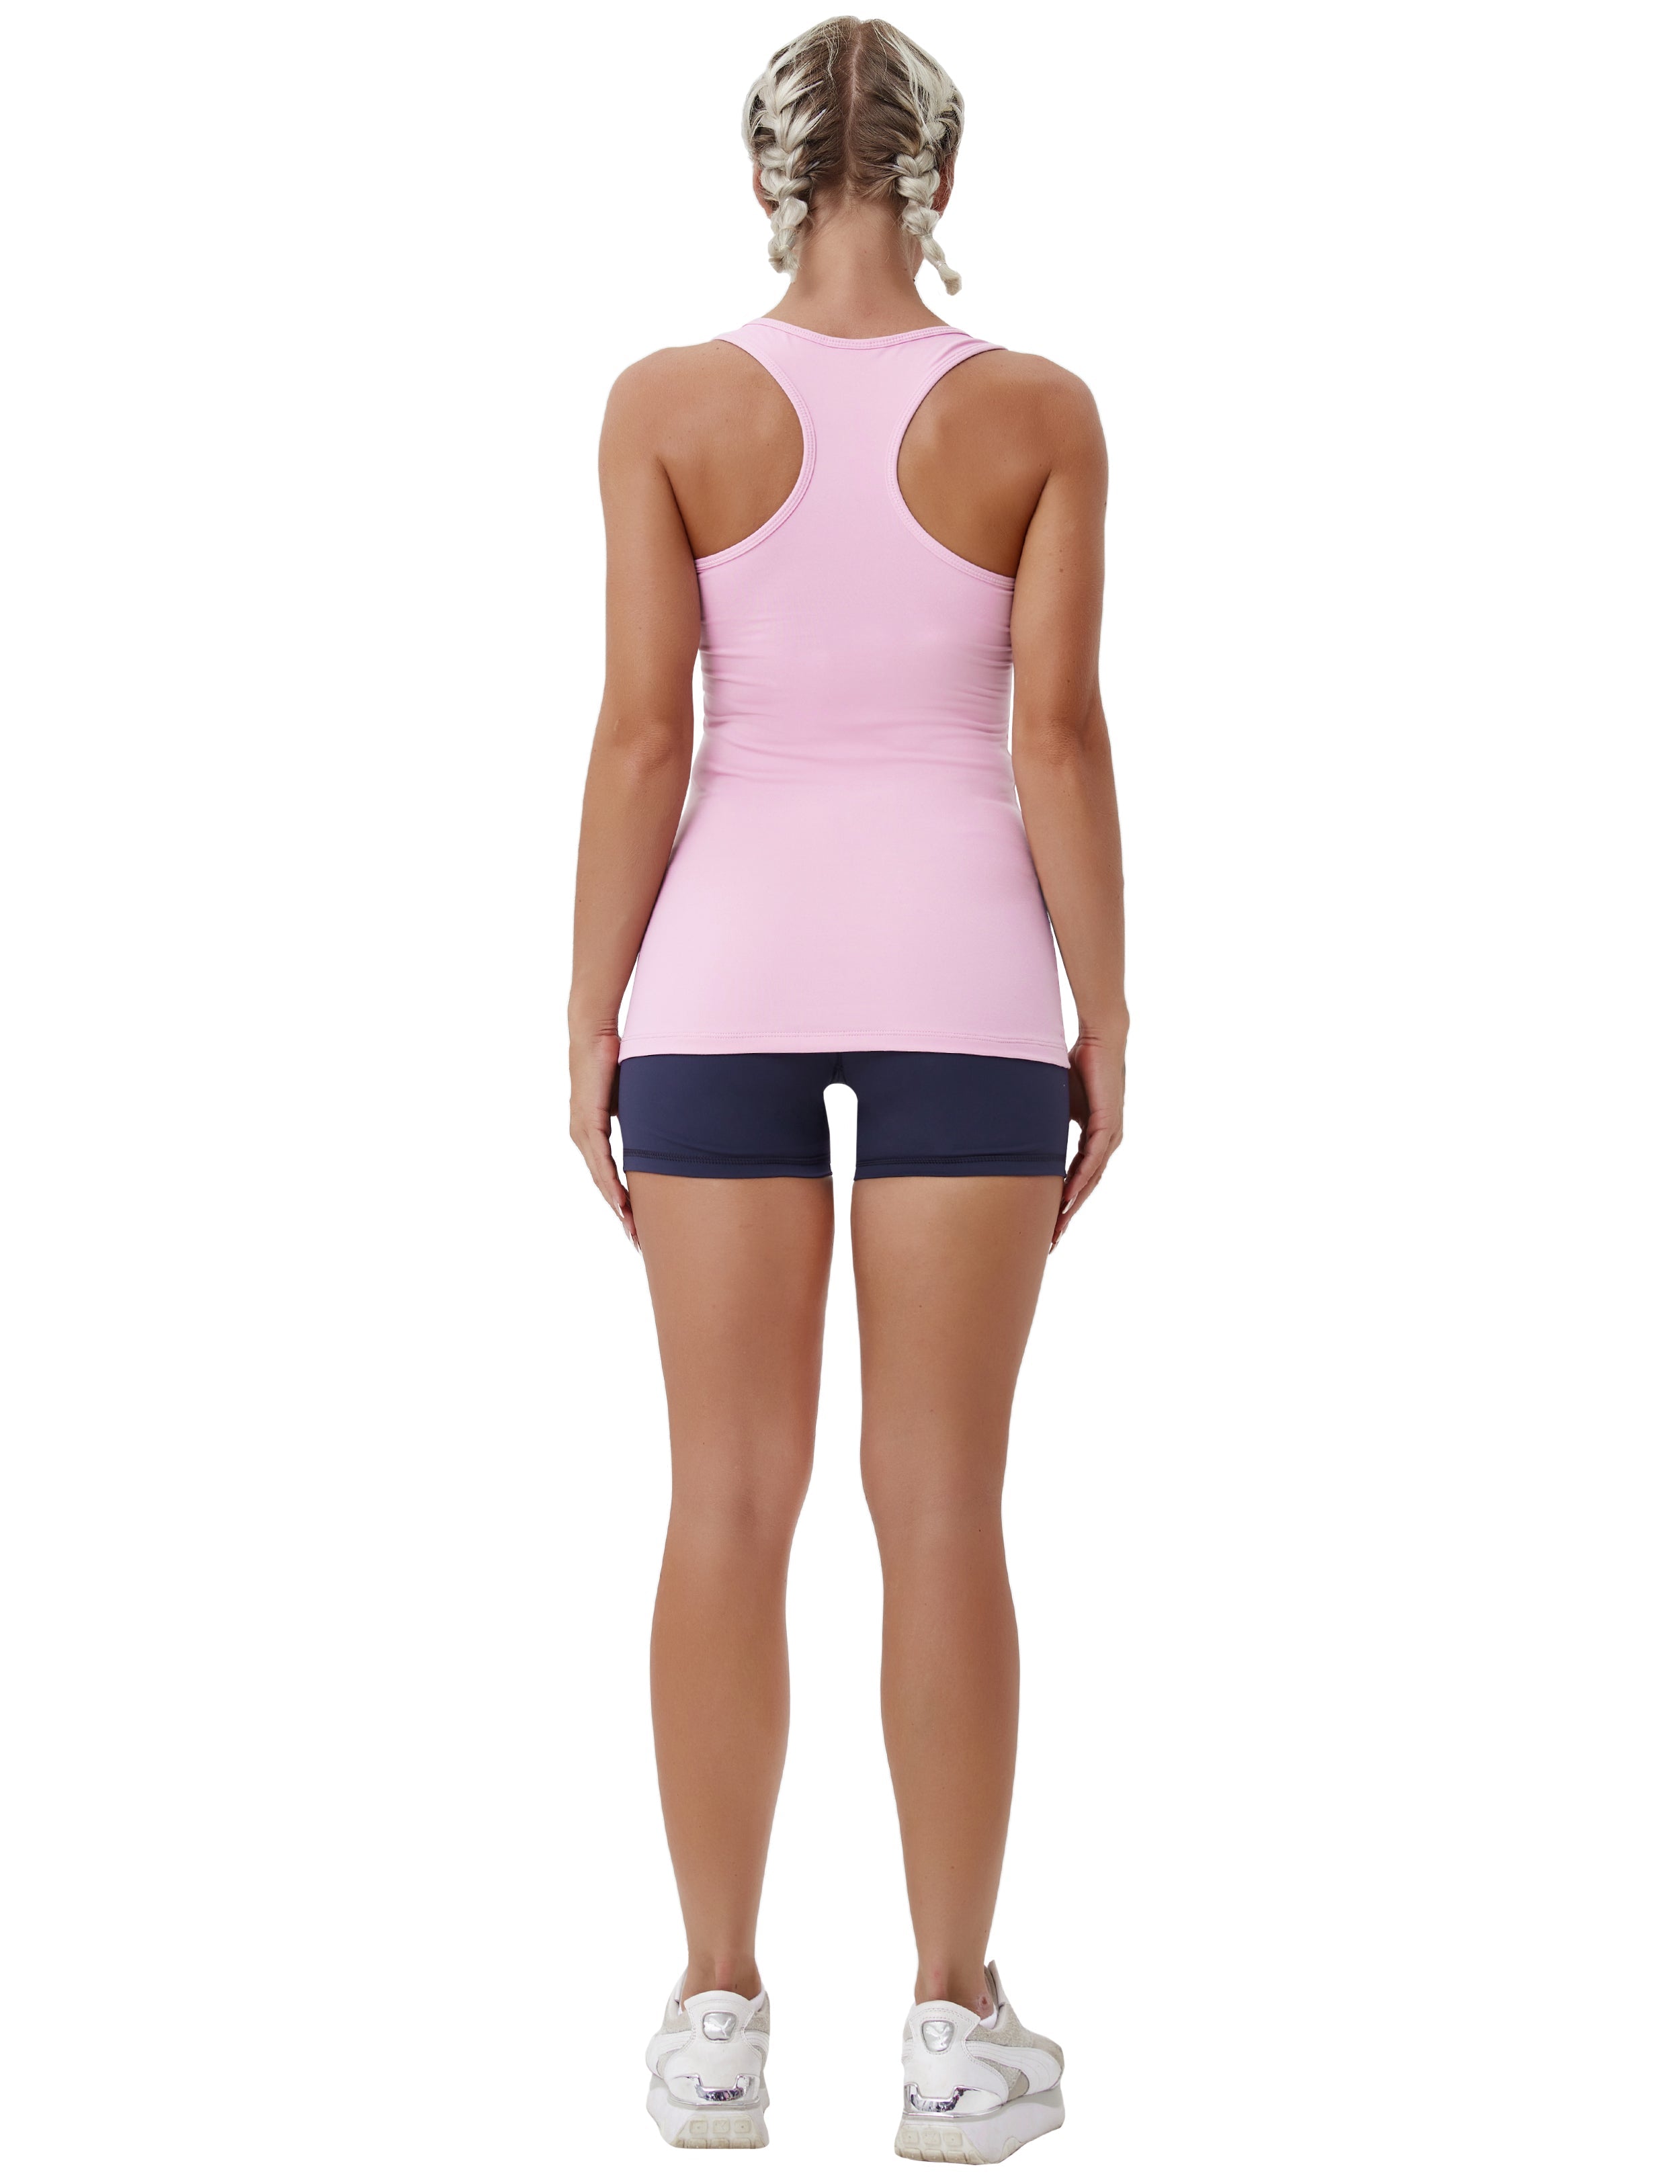 Racerback Athletic Tank Tops lightpink 92%Nylon/8%Spandex(Cotton Soft) Designed for Tall Size Tight Fit So buttery soft, it feels weightless Sweat-wicking Four-way stretch Breathable Contours your body Sits below the waistband for moderate, everyday coverage